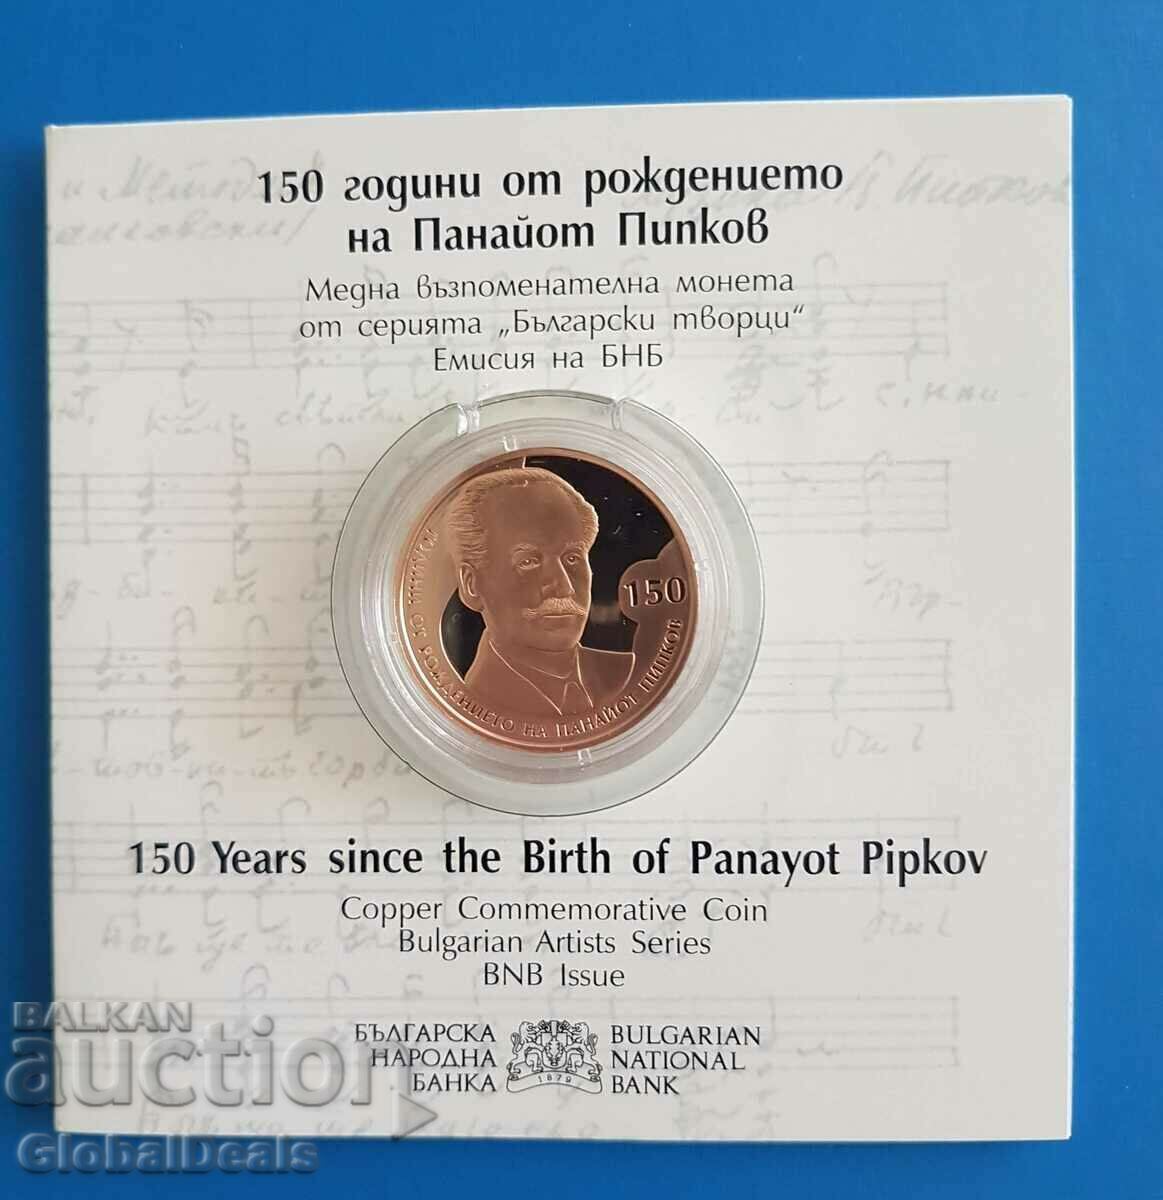 BGN 2 2021 year 150 from the birth of Panayot Pipkov